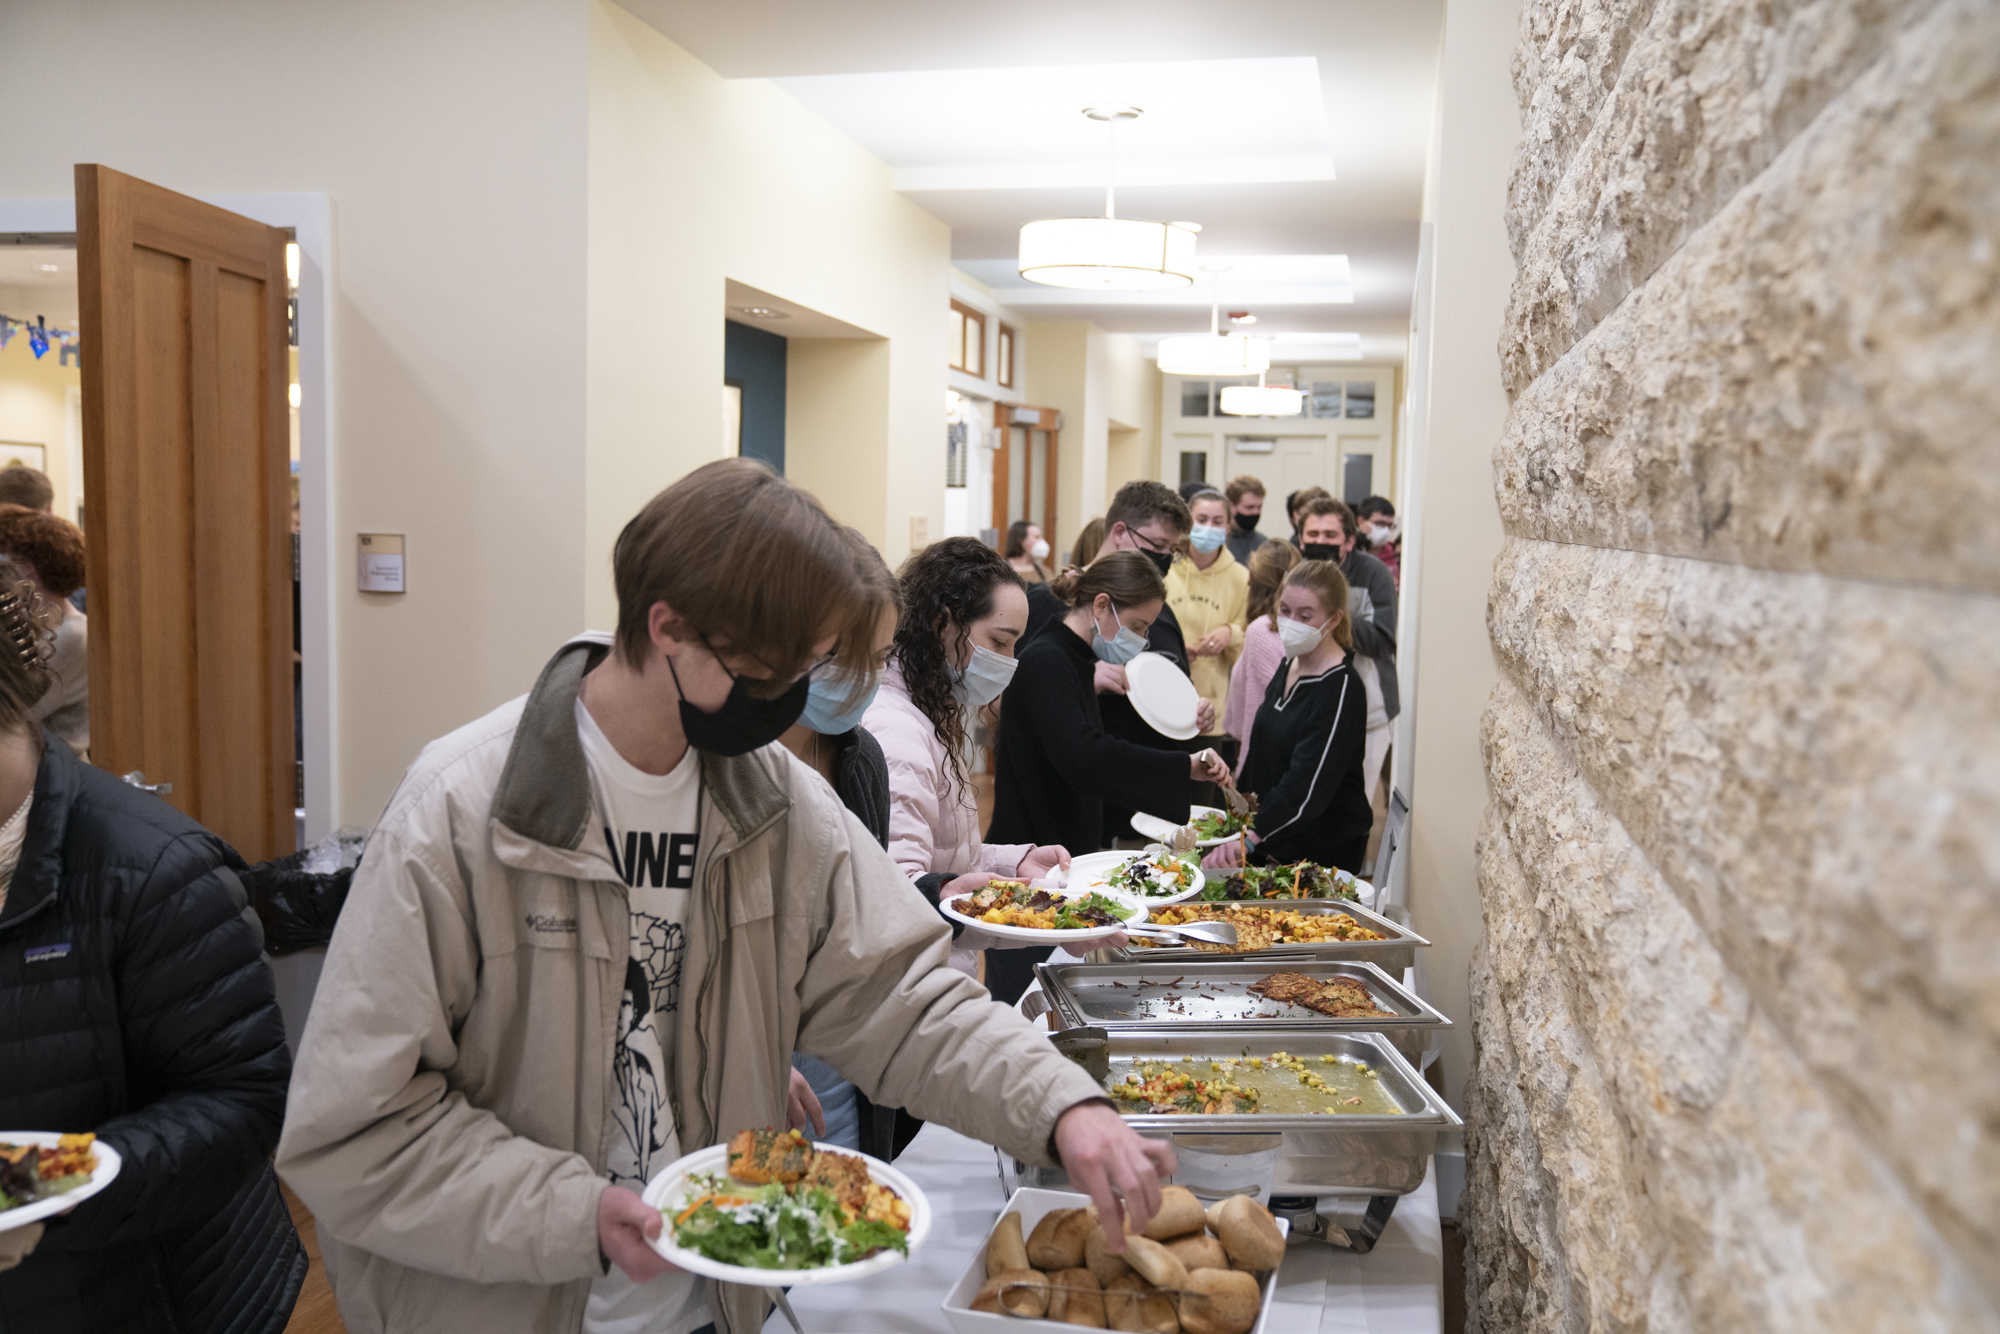 Students load up on food for Shabbat.